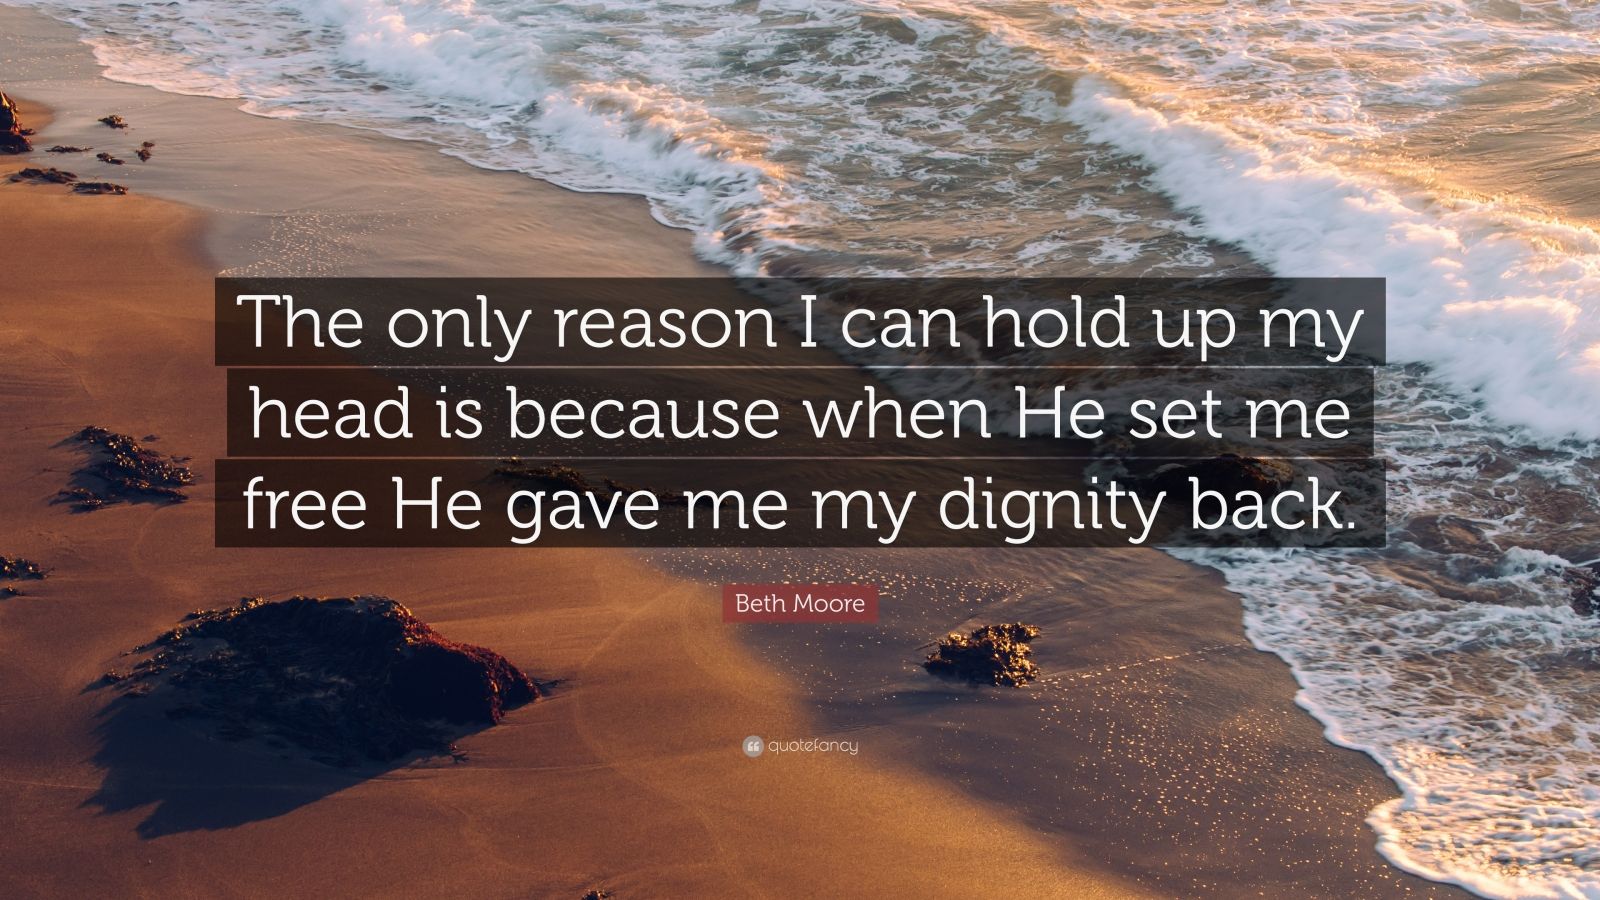 Download Beth Moore Quote: "The only reason I can hold up my head ...